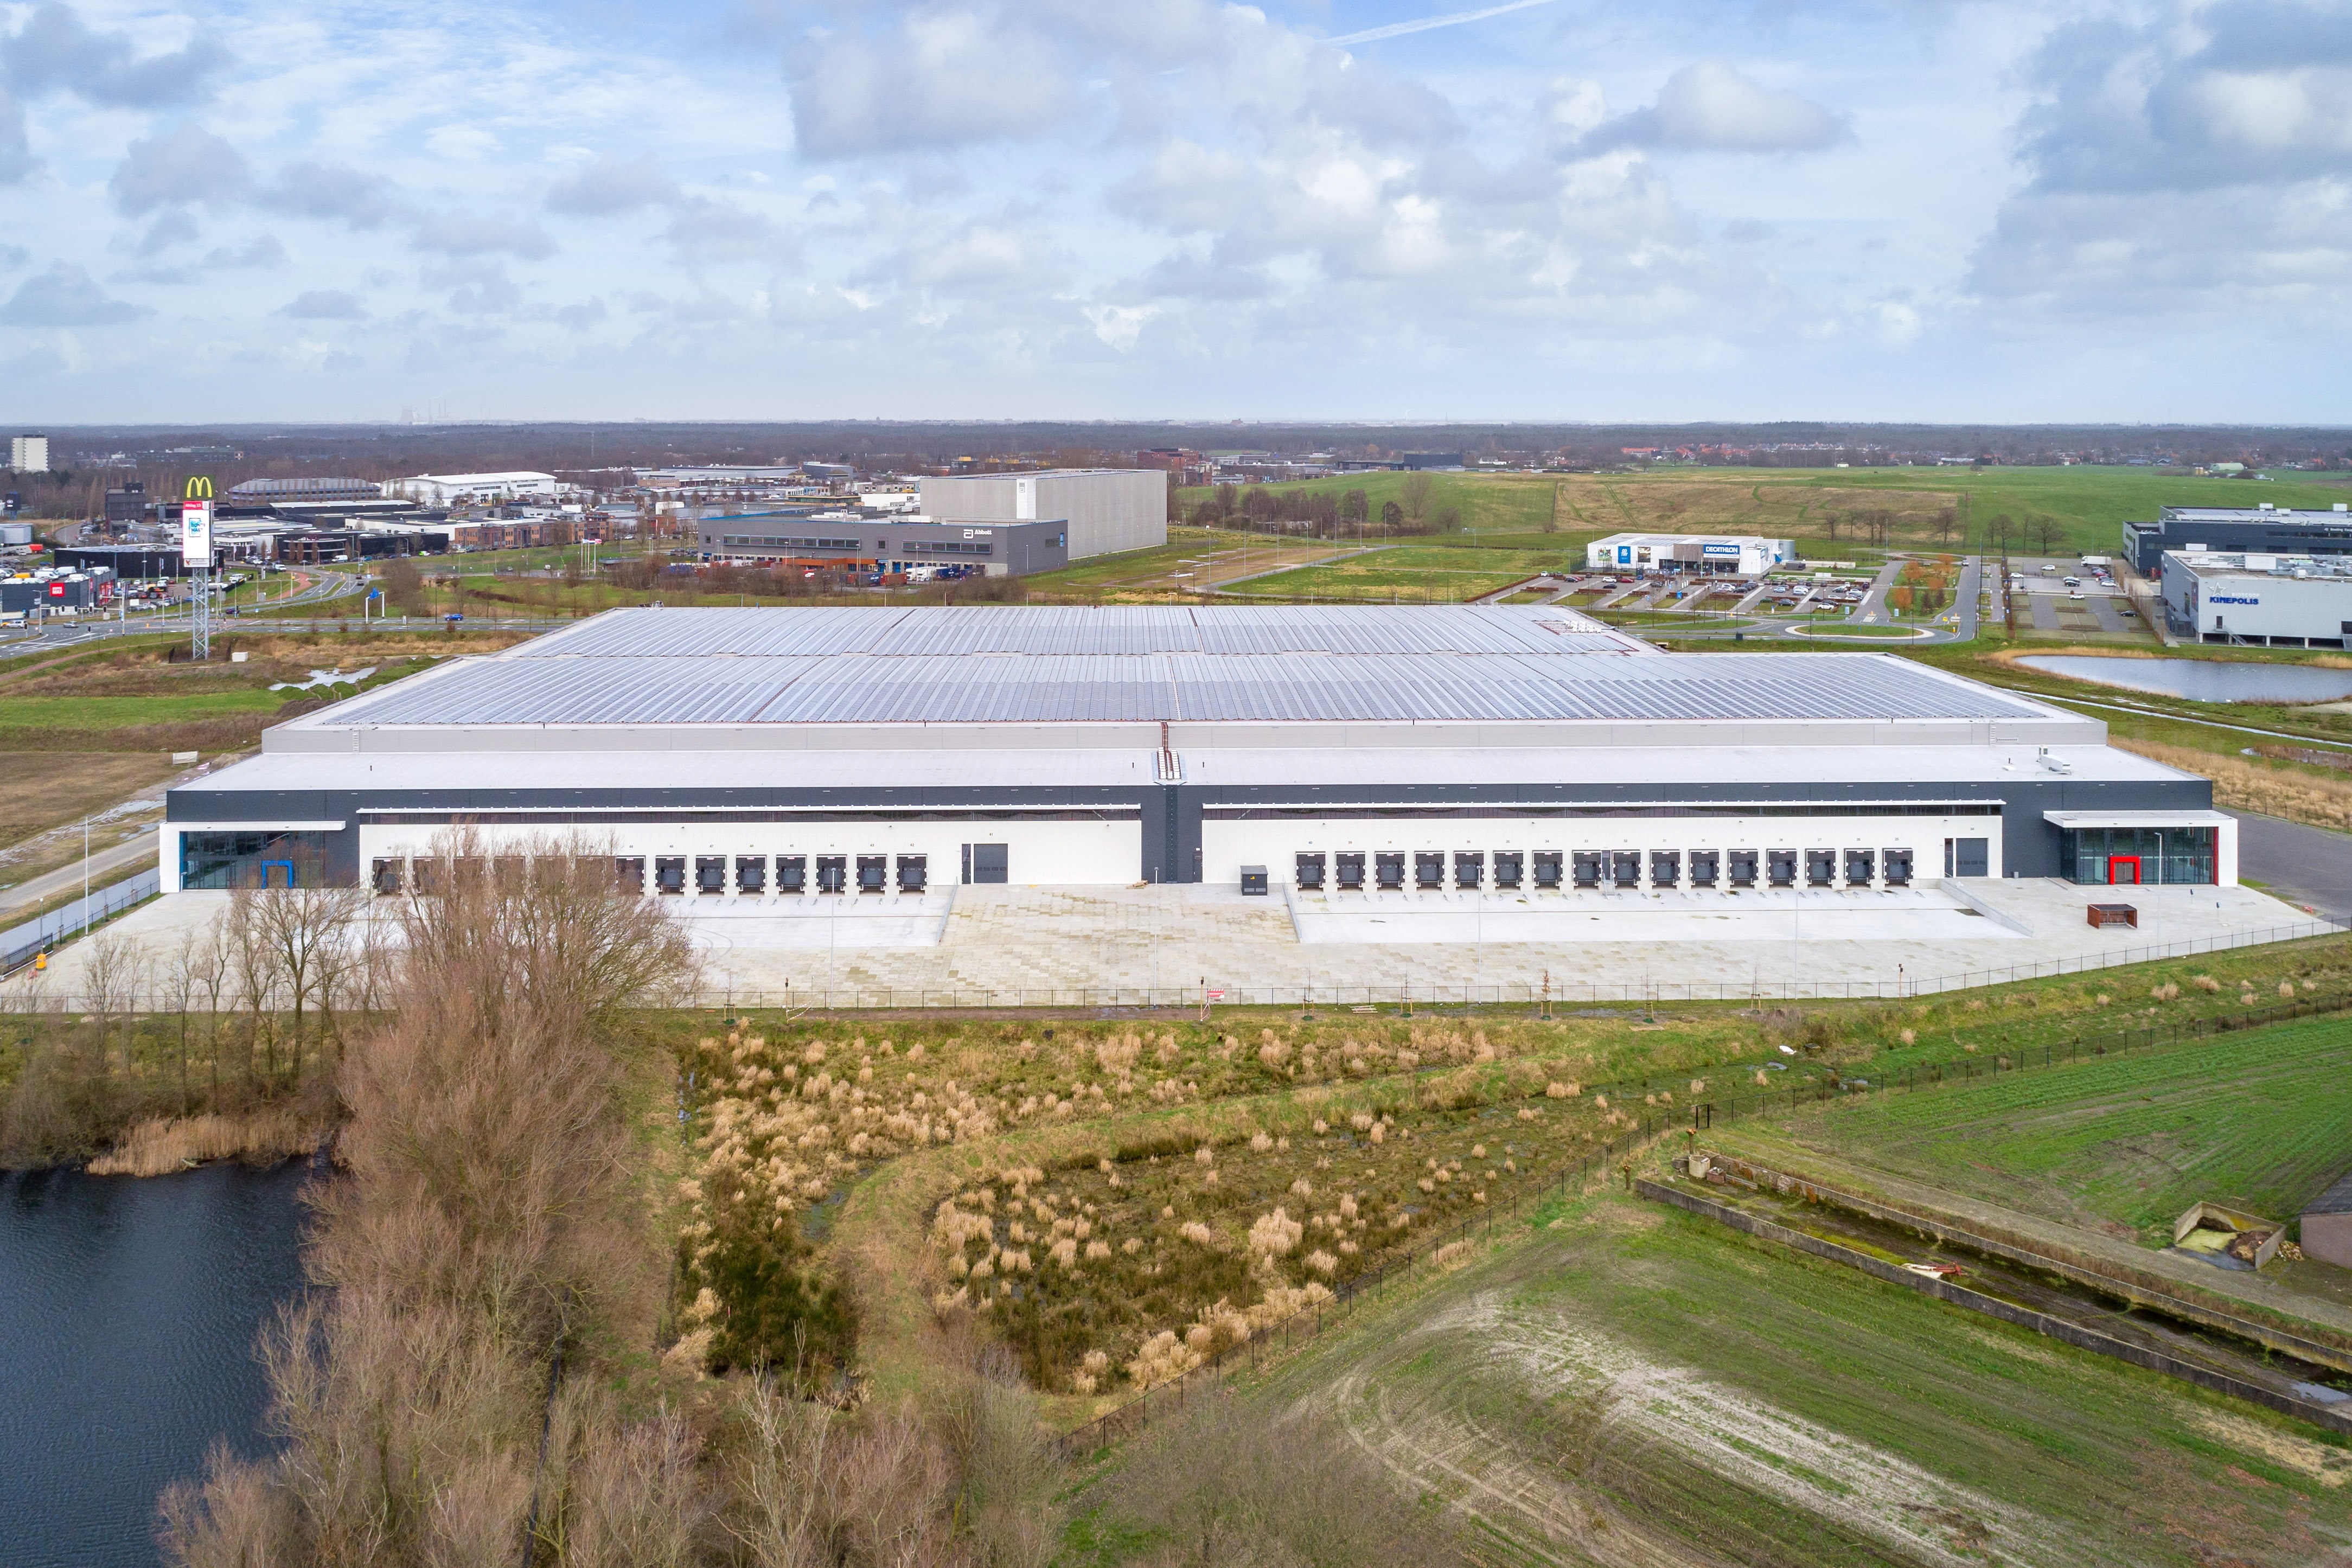 Decathlon to open distribution center in the Netherlands